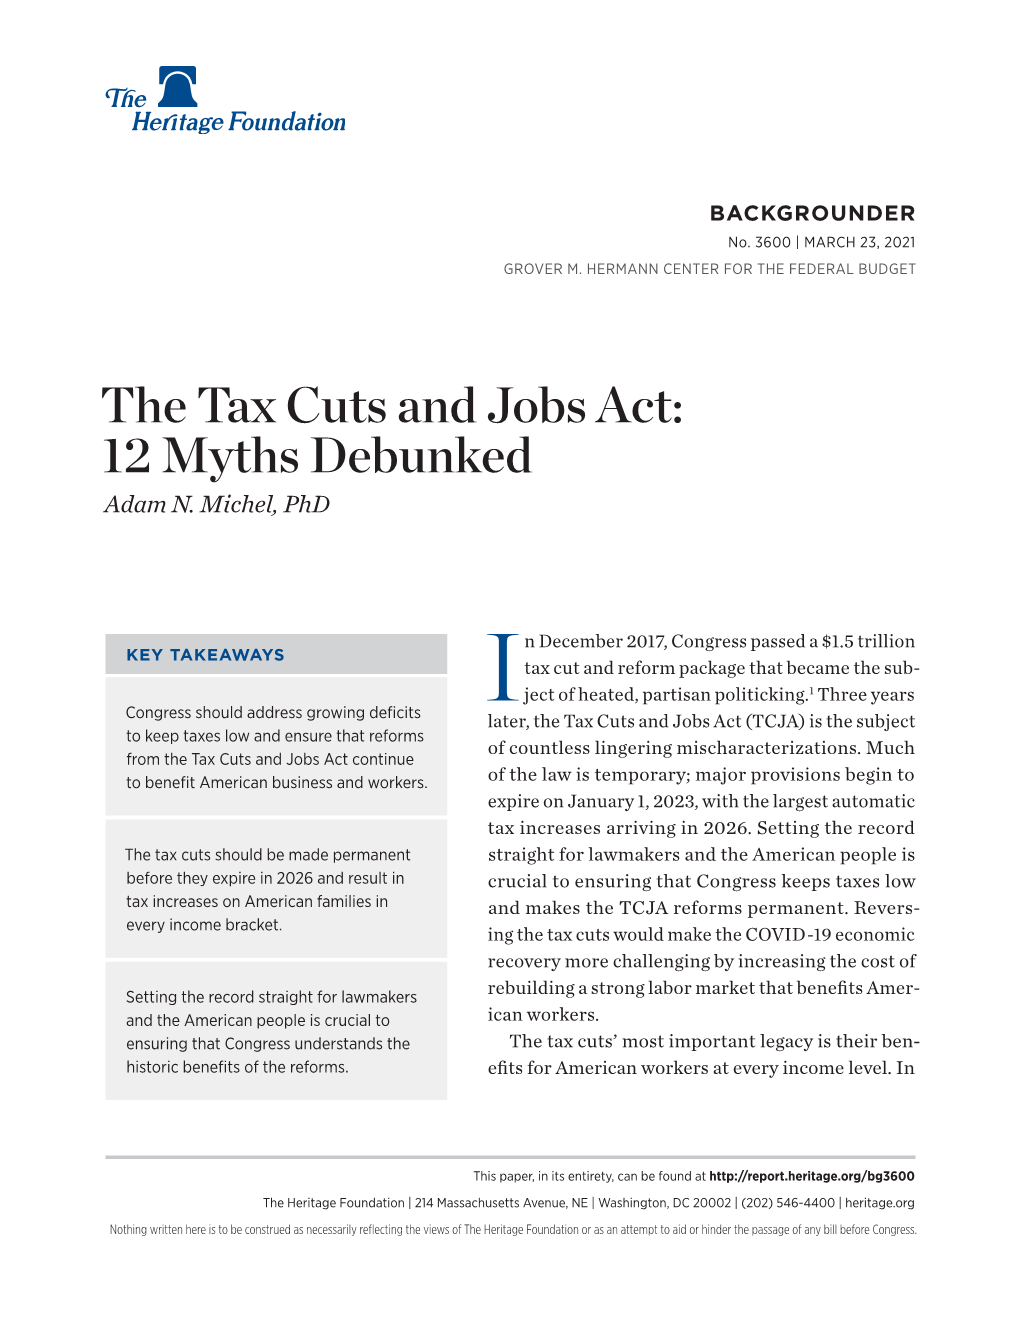 The Tax Cuts and Jobs Act: 12 Myths Debunked Adam N